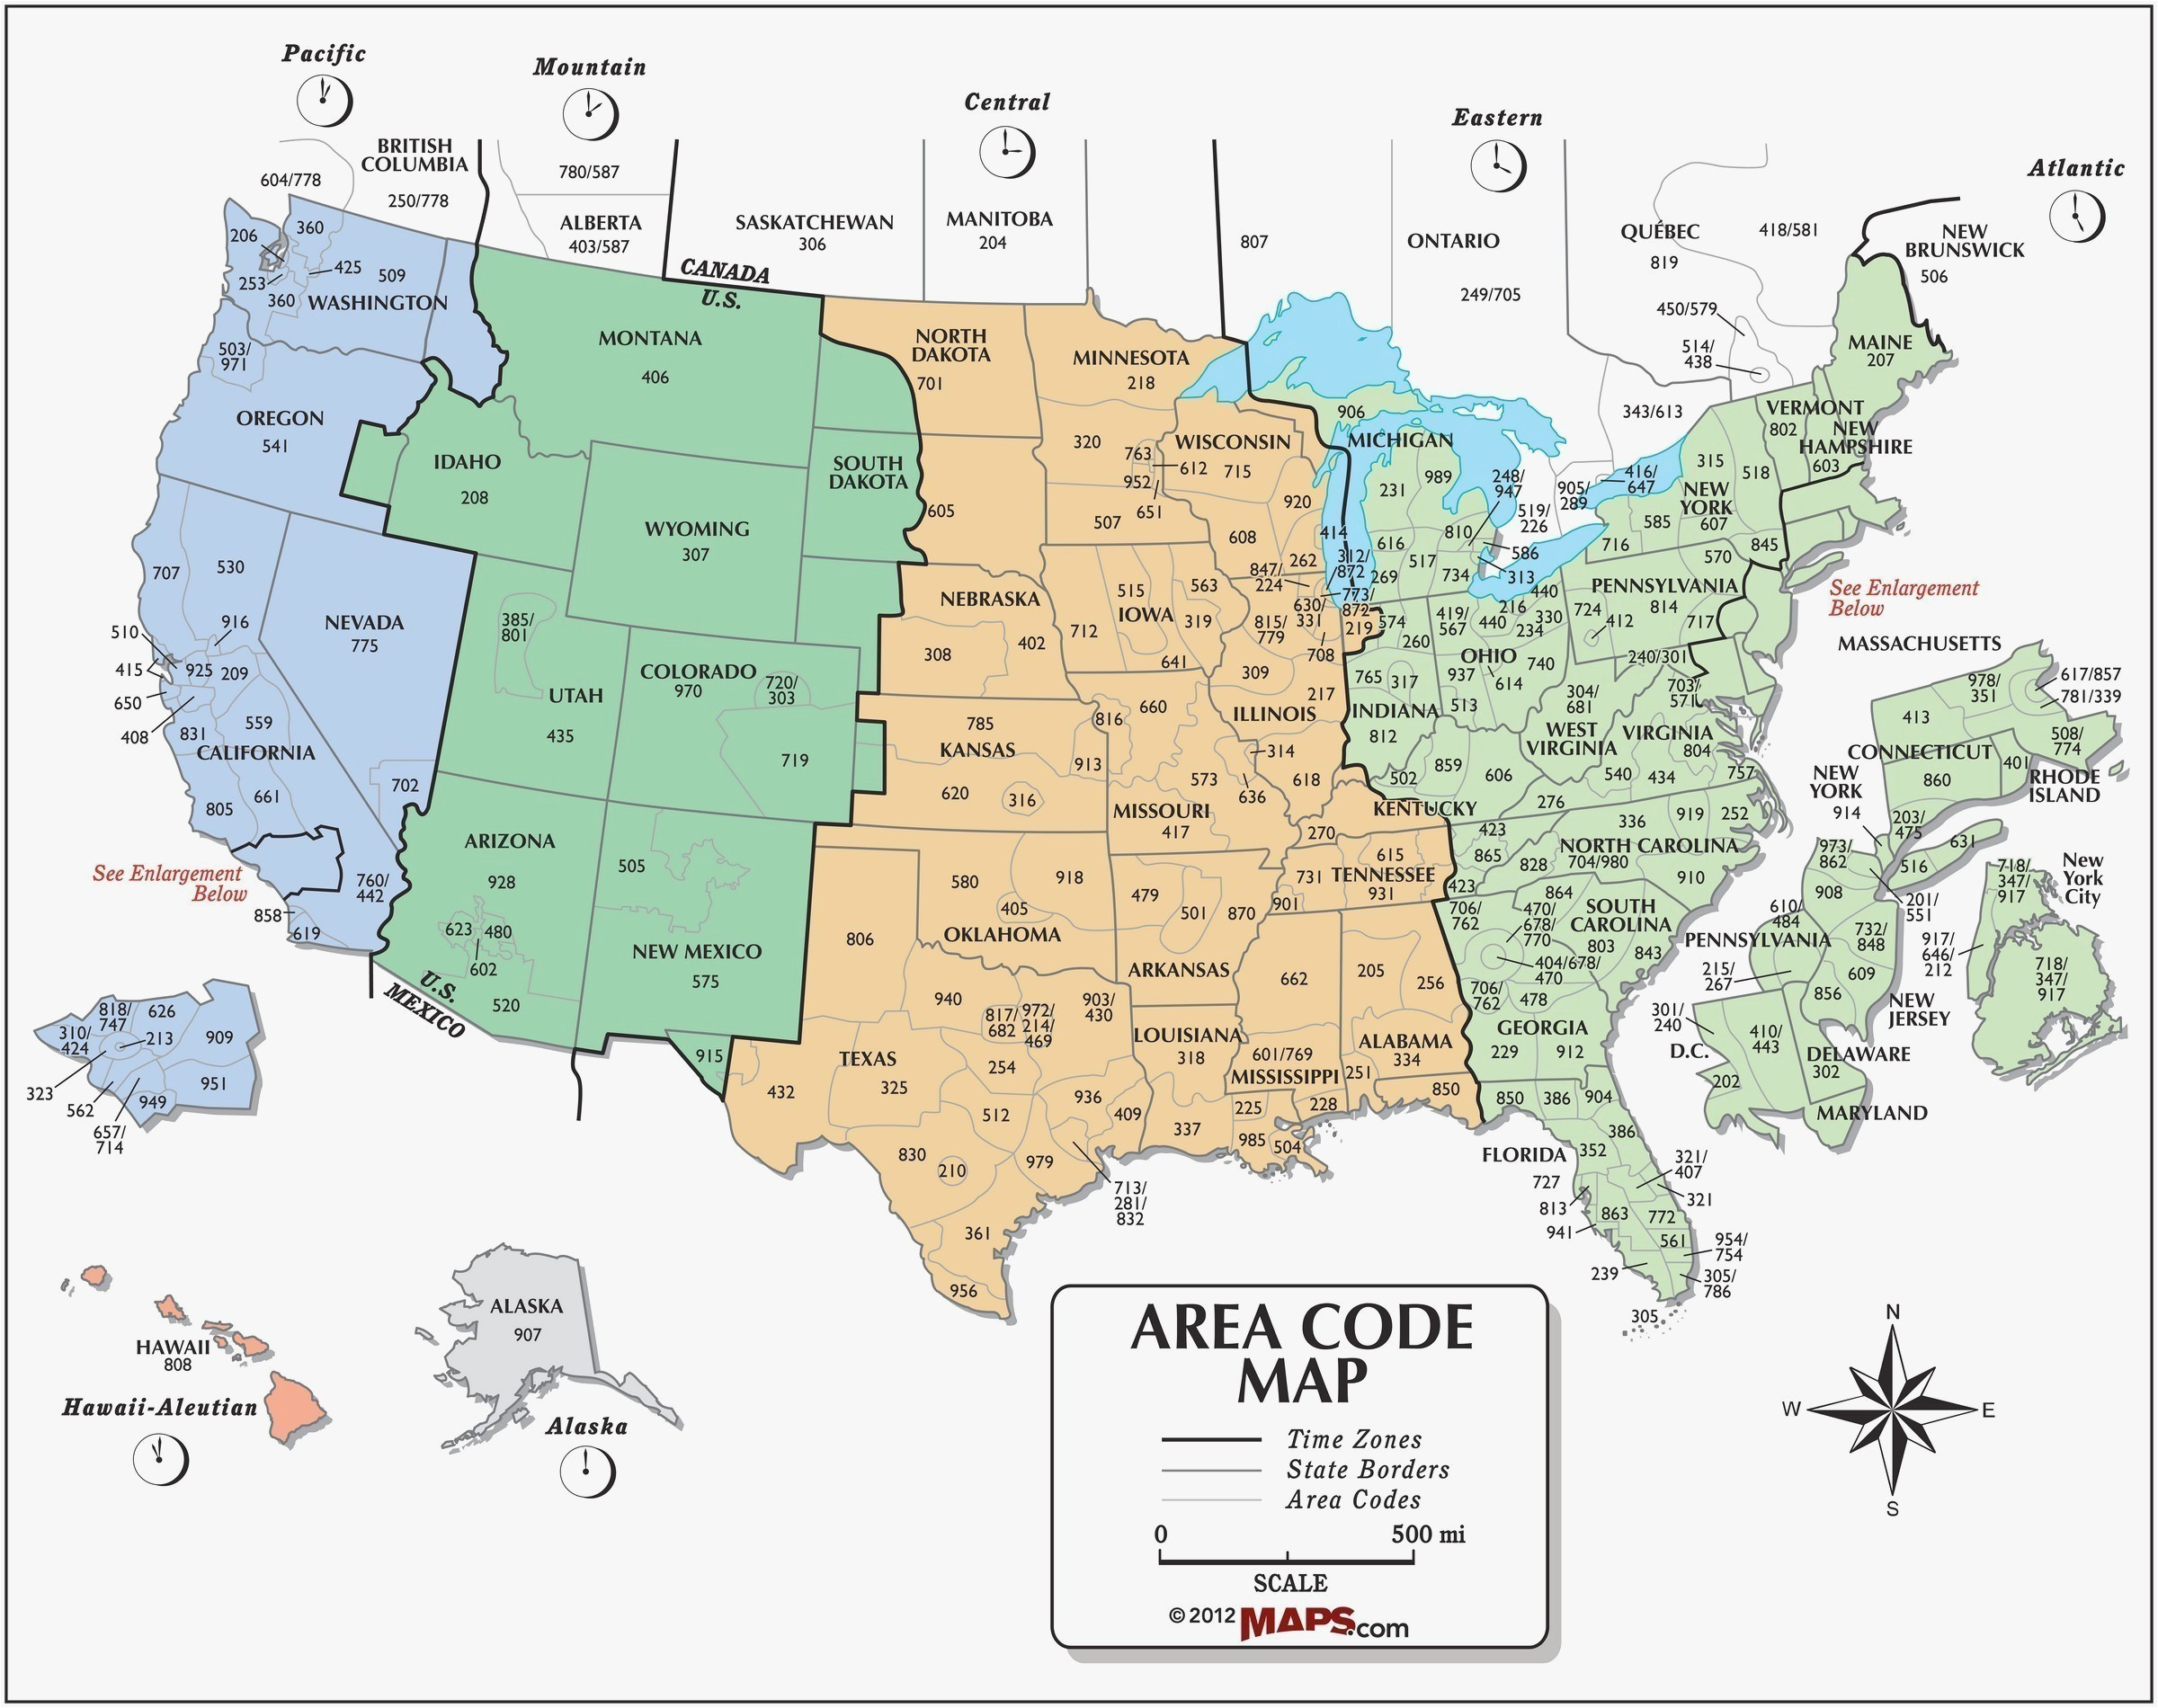 Time Zone Map Oregon Show Me A Map Of The United States Time Zones Fresh Time Zone Maps Of Time Zone Map Oregon 